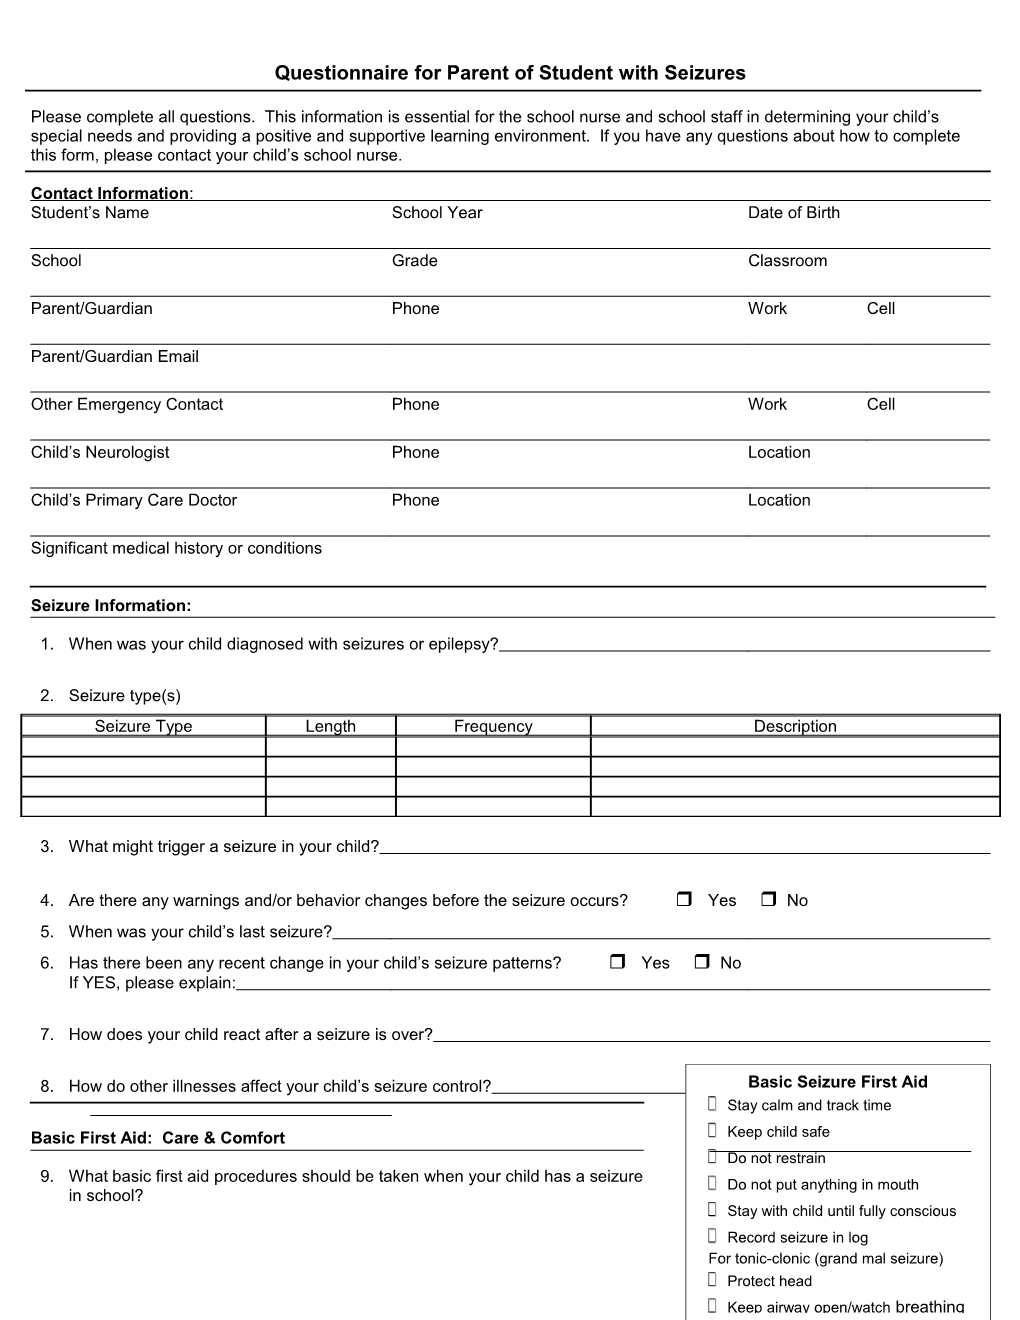 Questionnaire for Parent of Student with Seizures